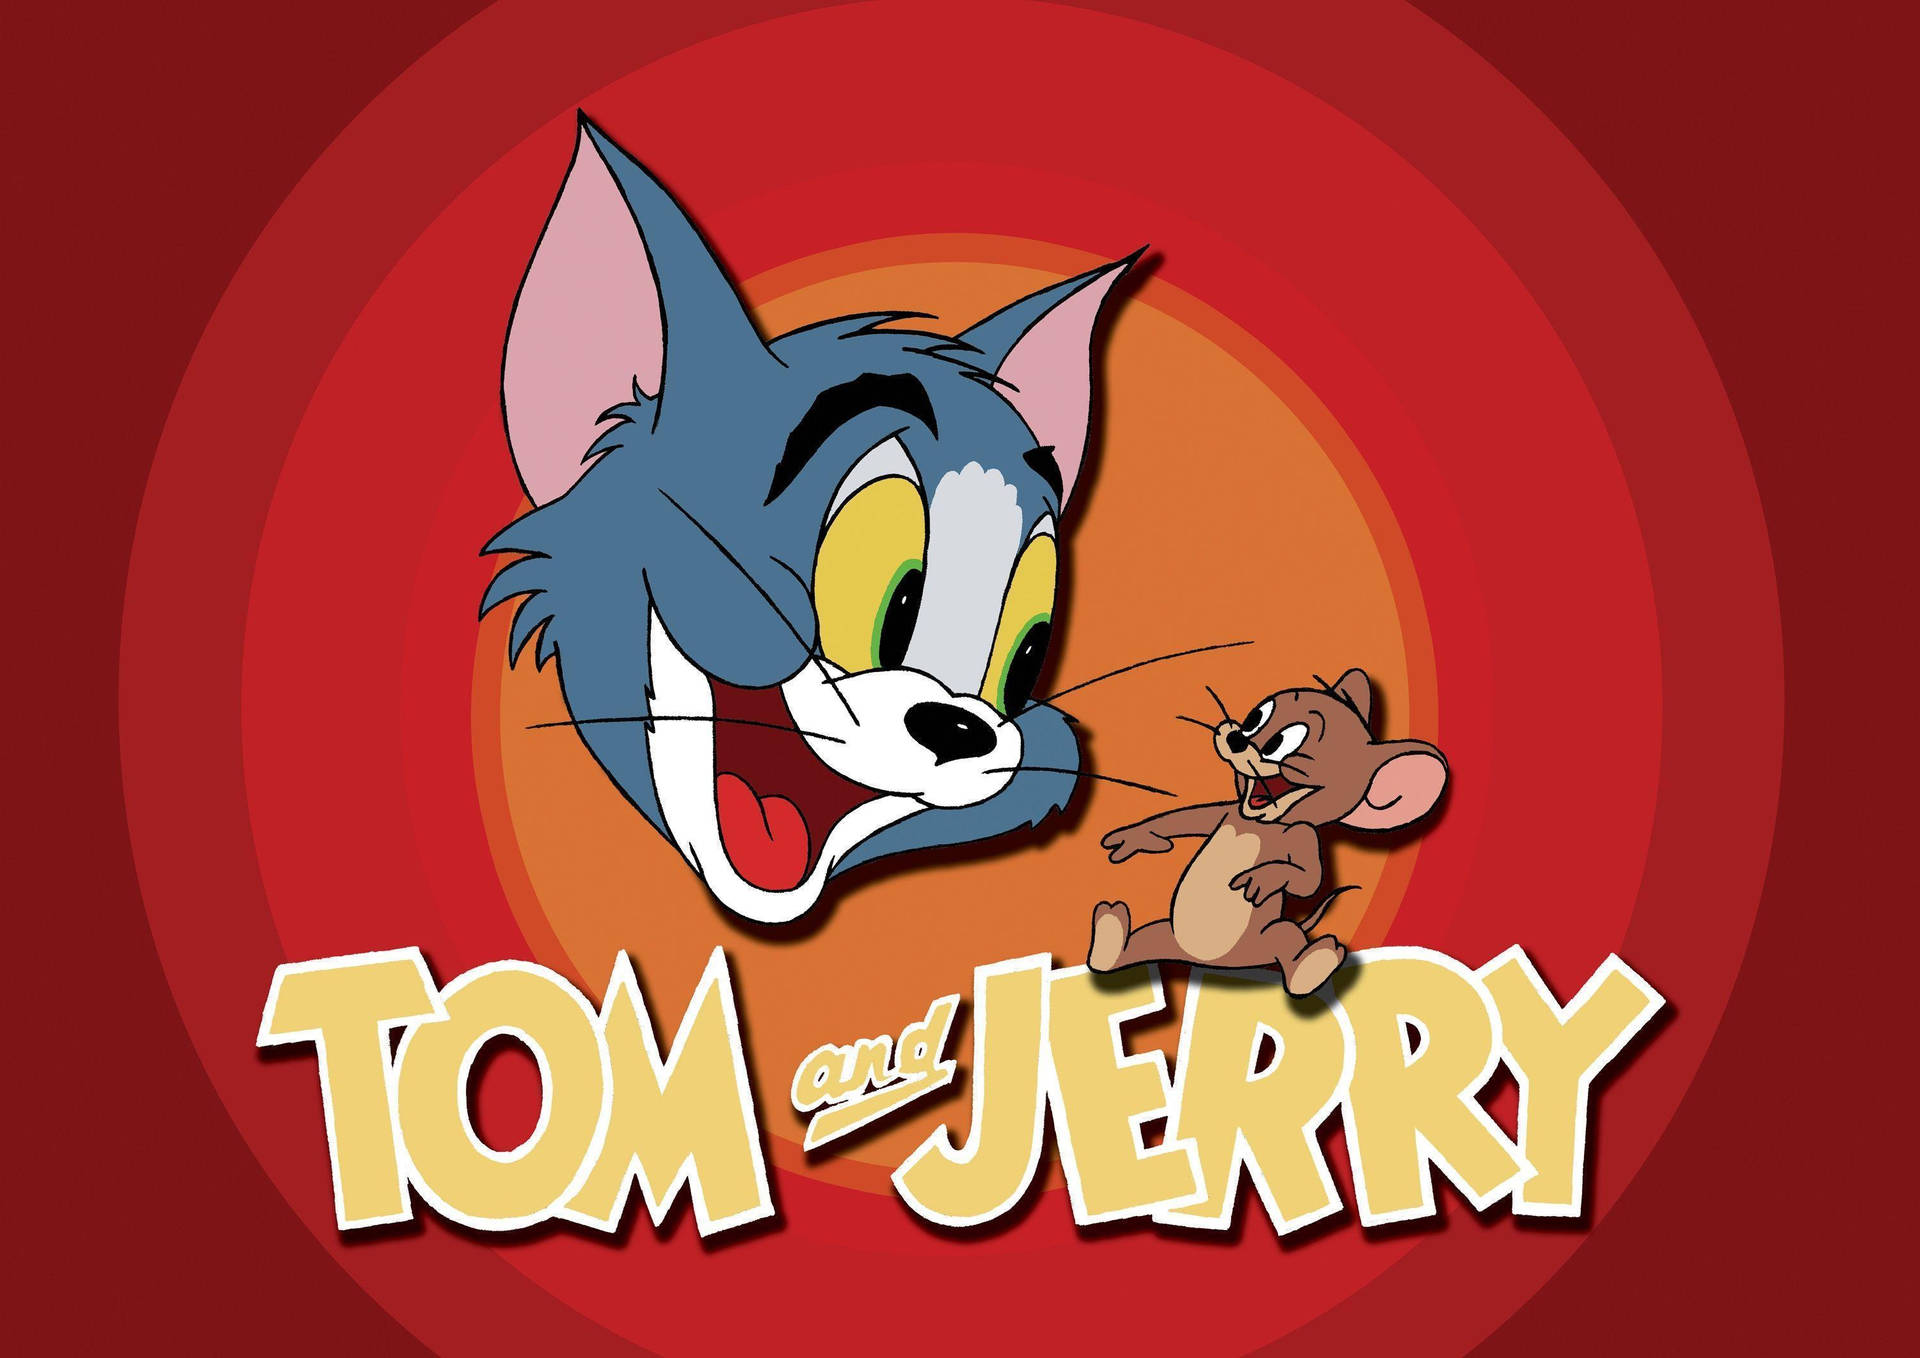 The Tom and Jerry Show iPhone Wallpapers Free Download